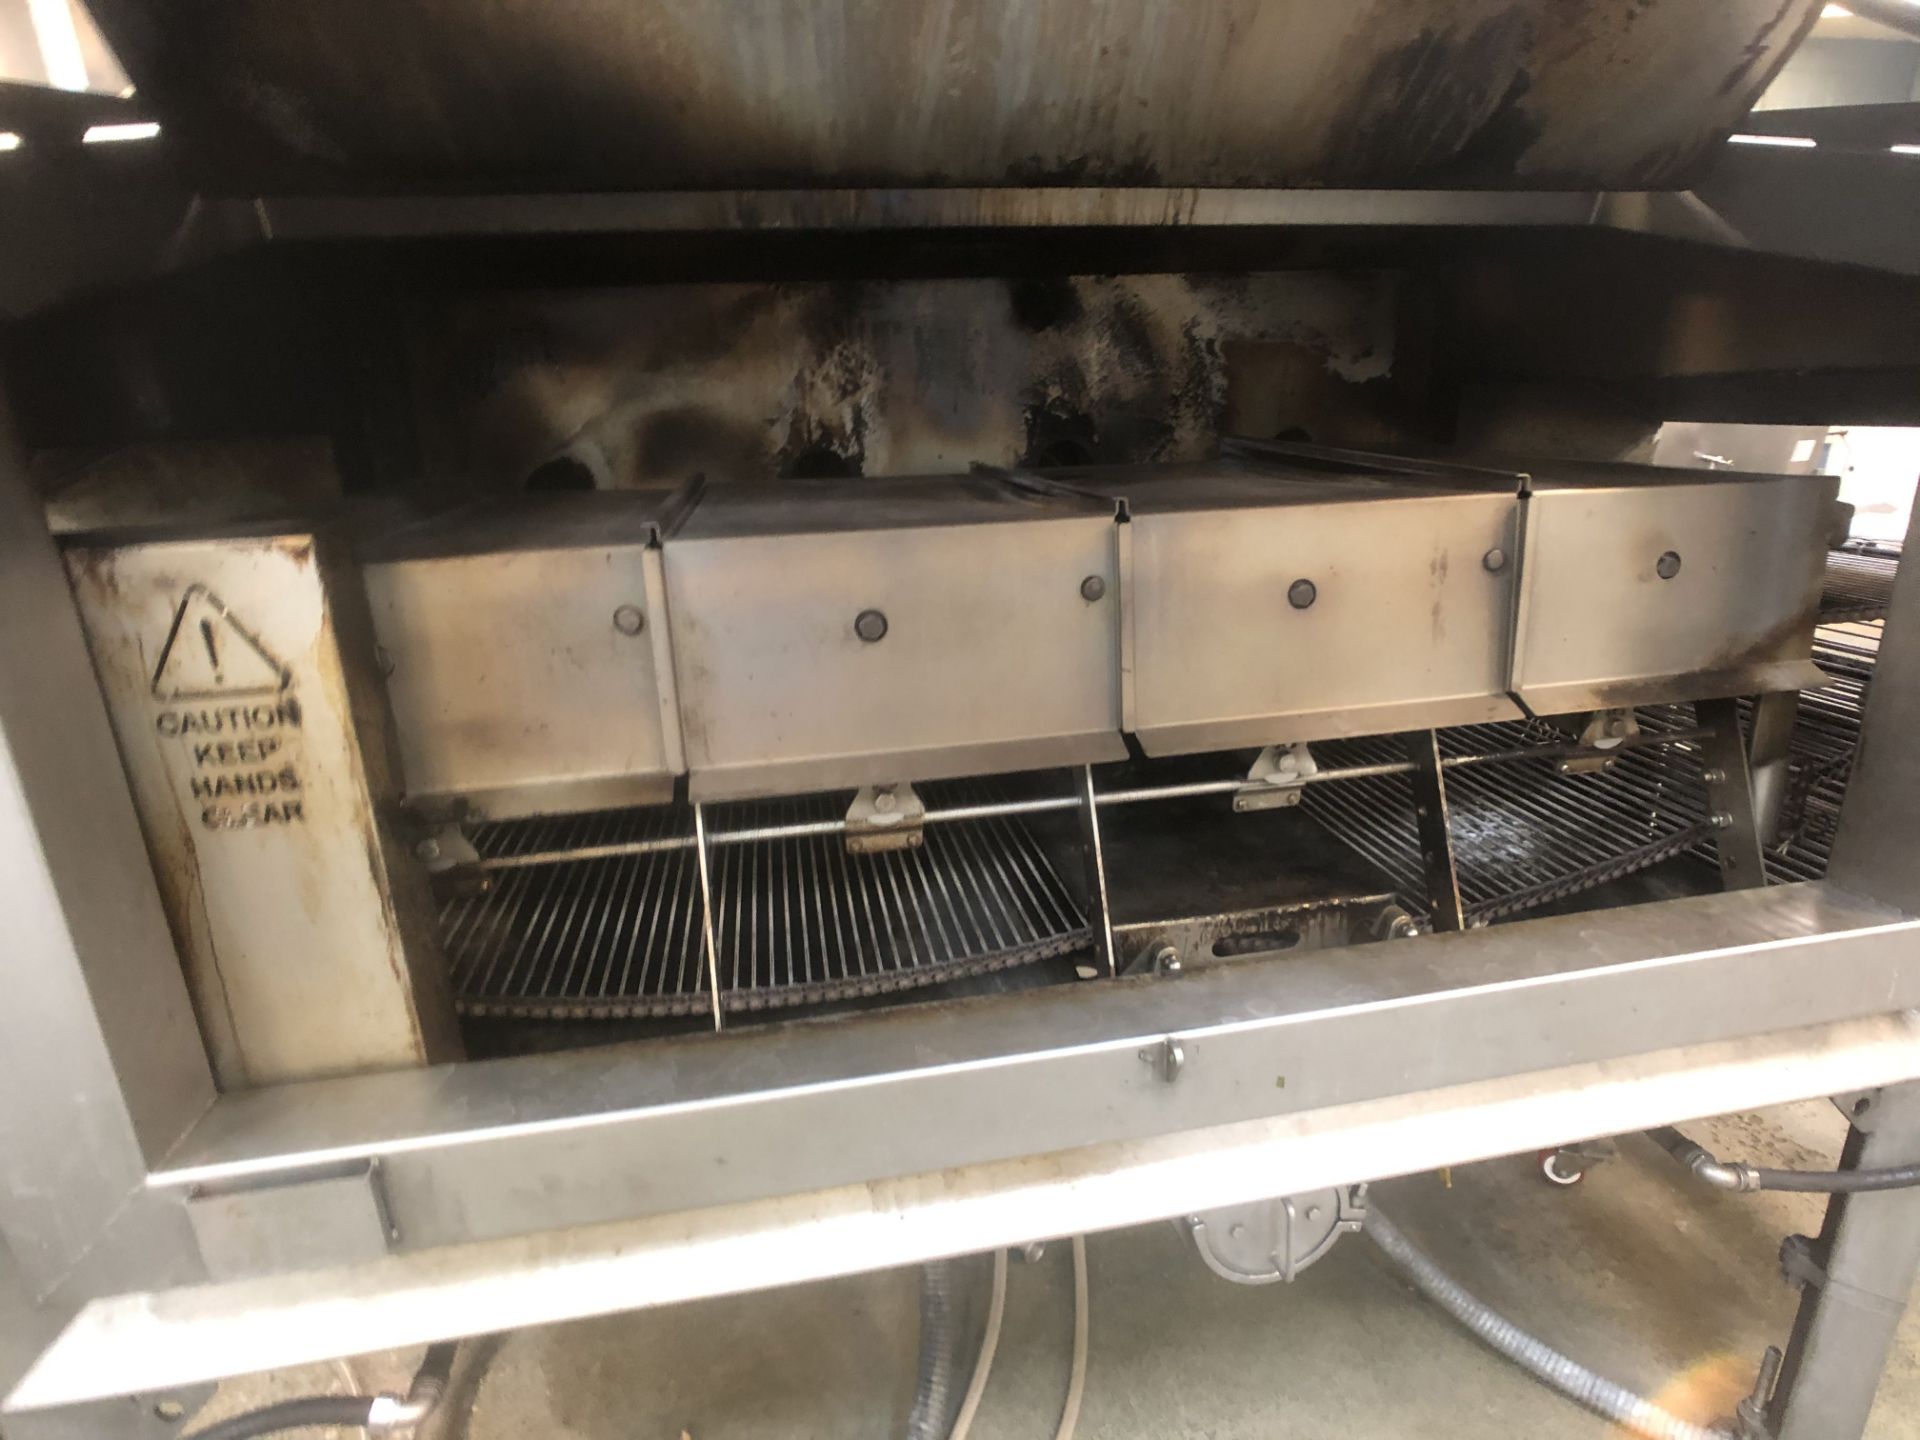 2019 Unitherm Food Systems 24" Flame Grill with Preheat, Model FG-24-8B-P, S/N FLGR-2485, Includes - Image 13 of 19